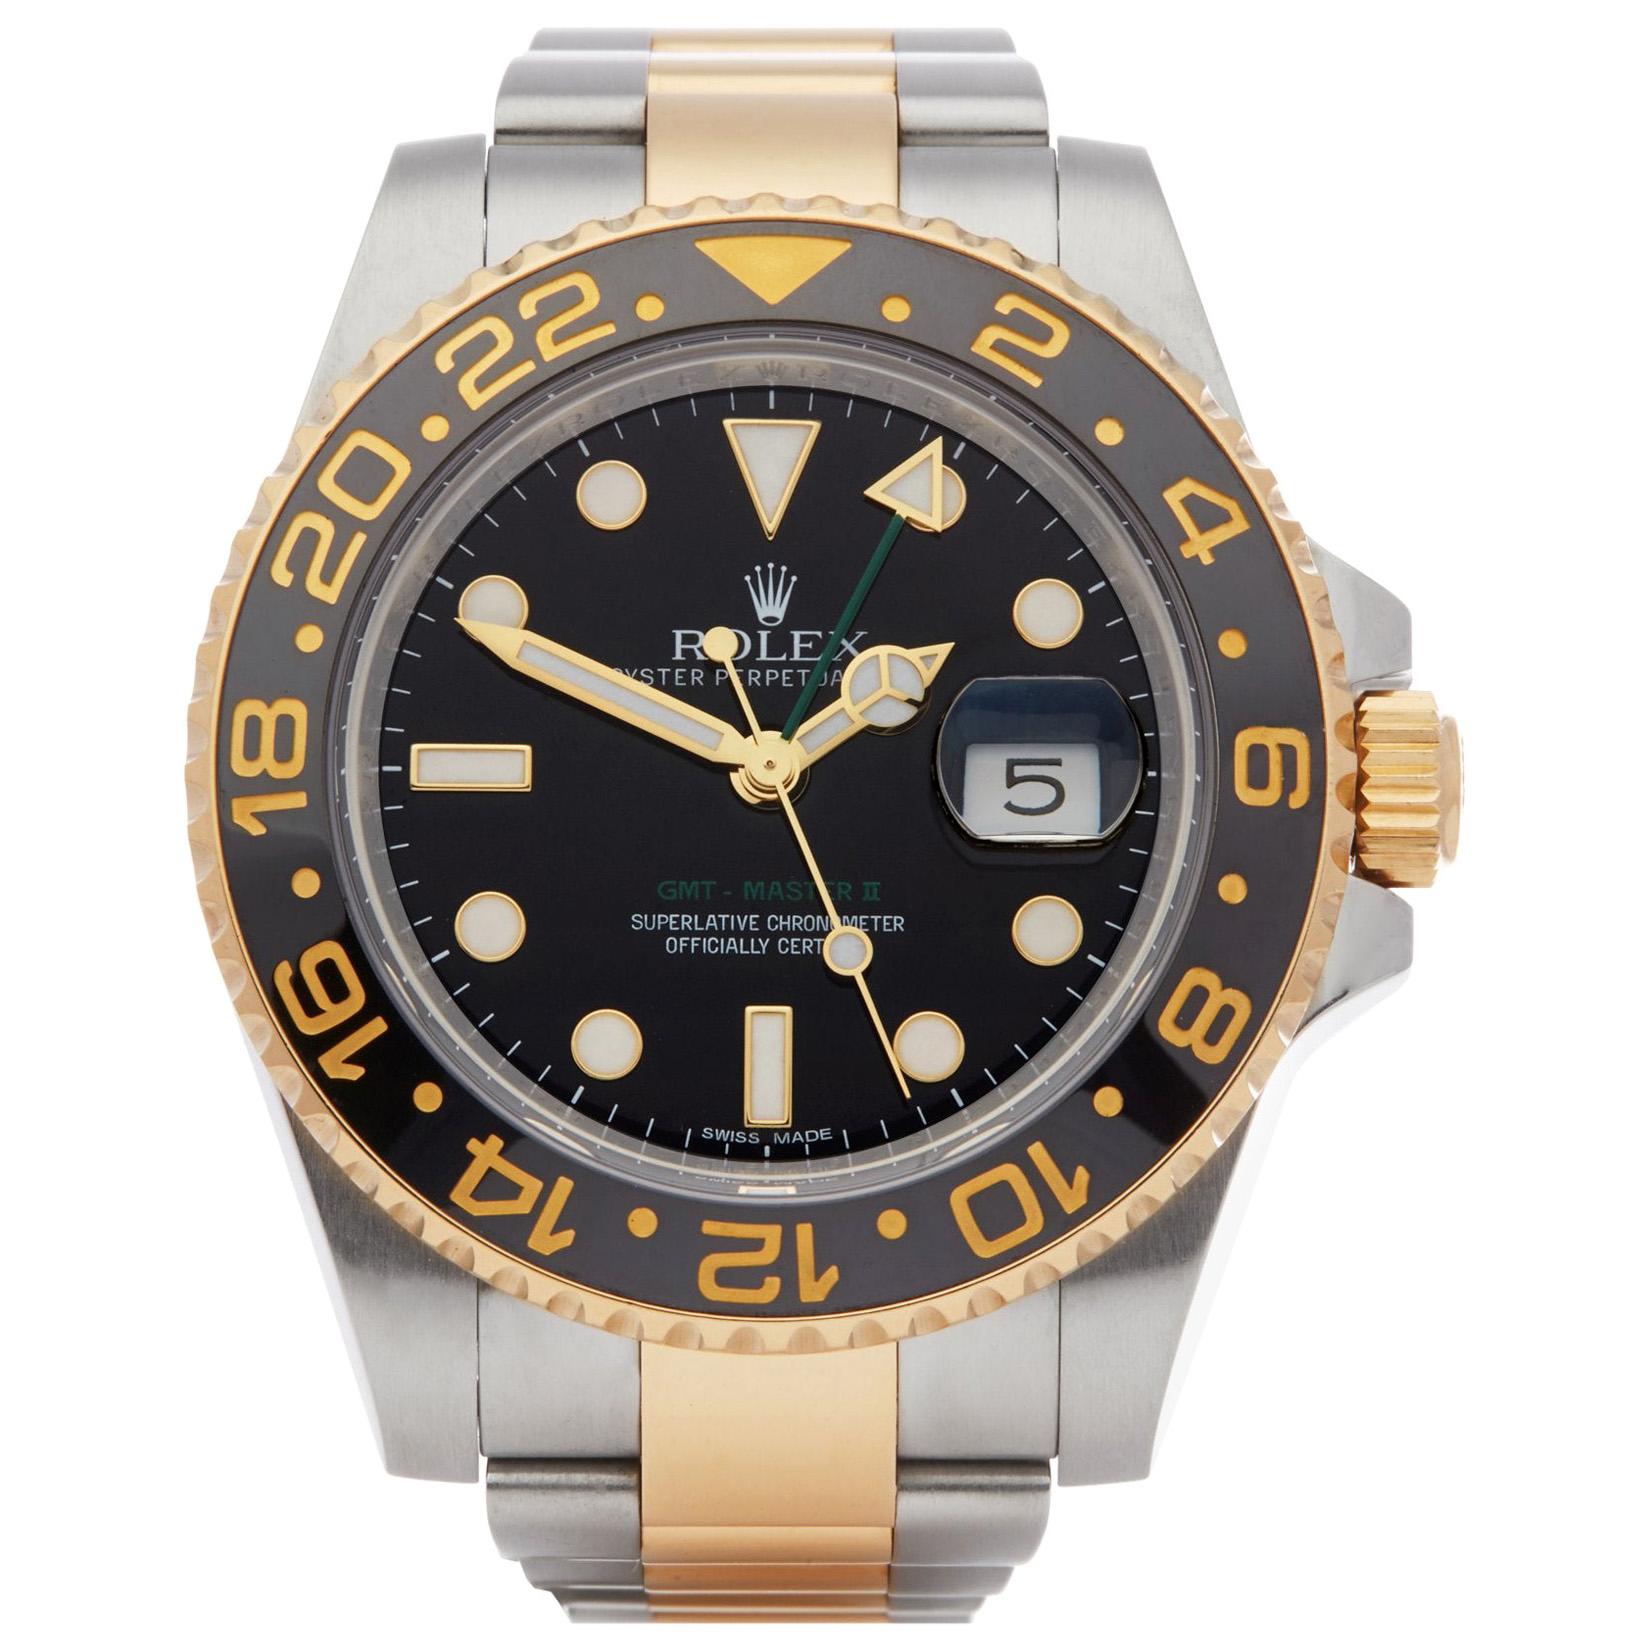 Rolex GMT-Master II 0 116713LN Men's Stainless Steel and Yellow Gold 0 Watch